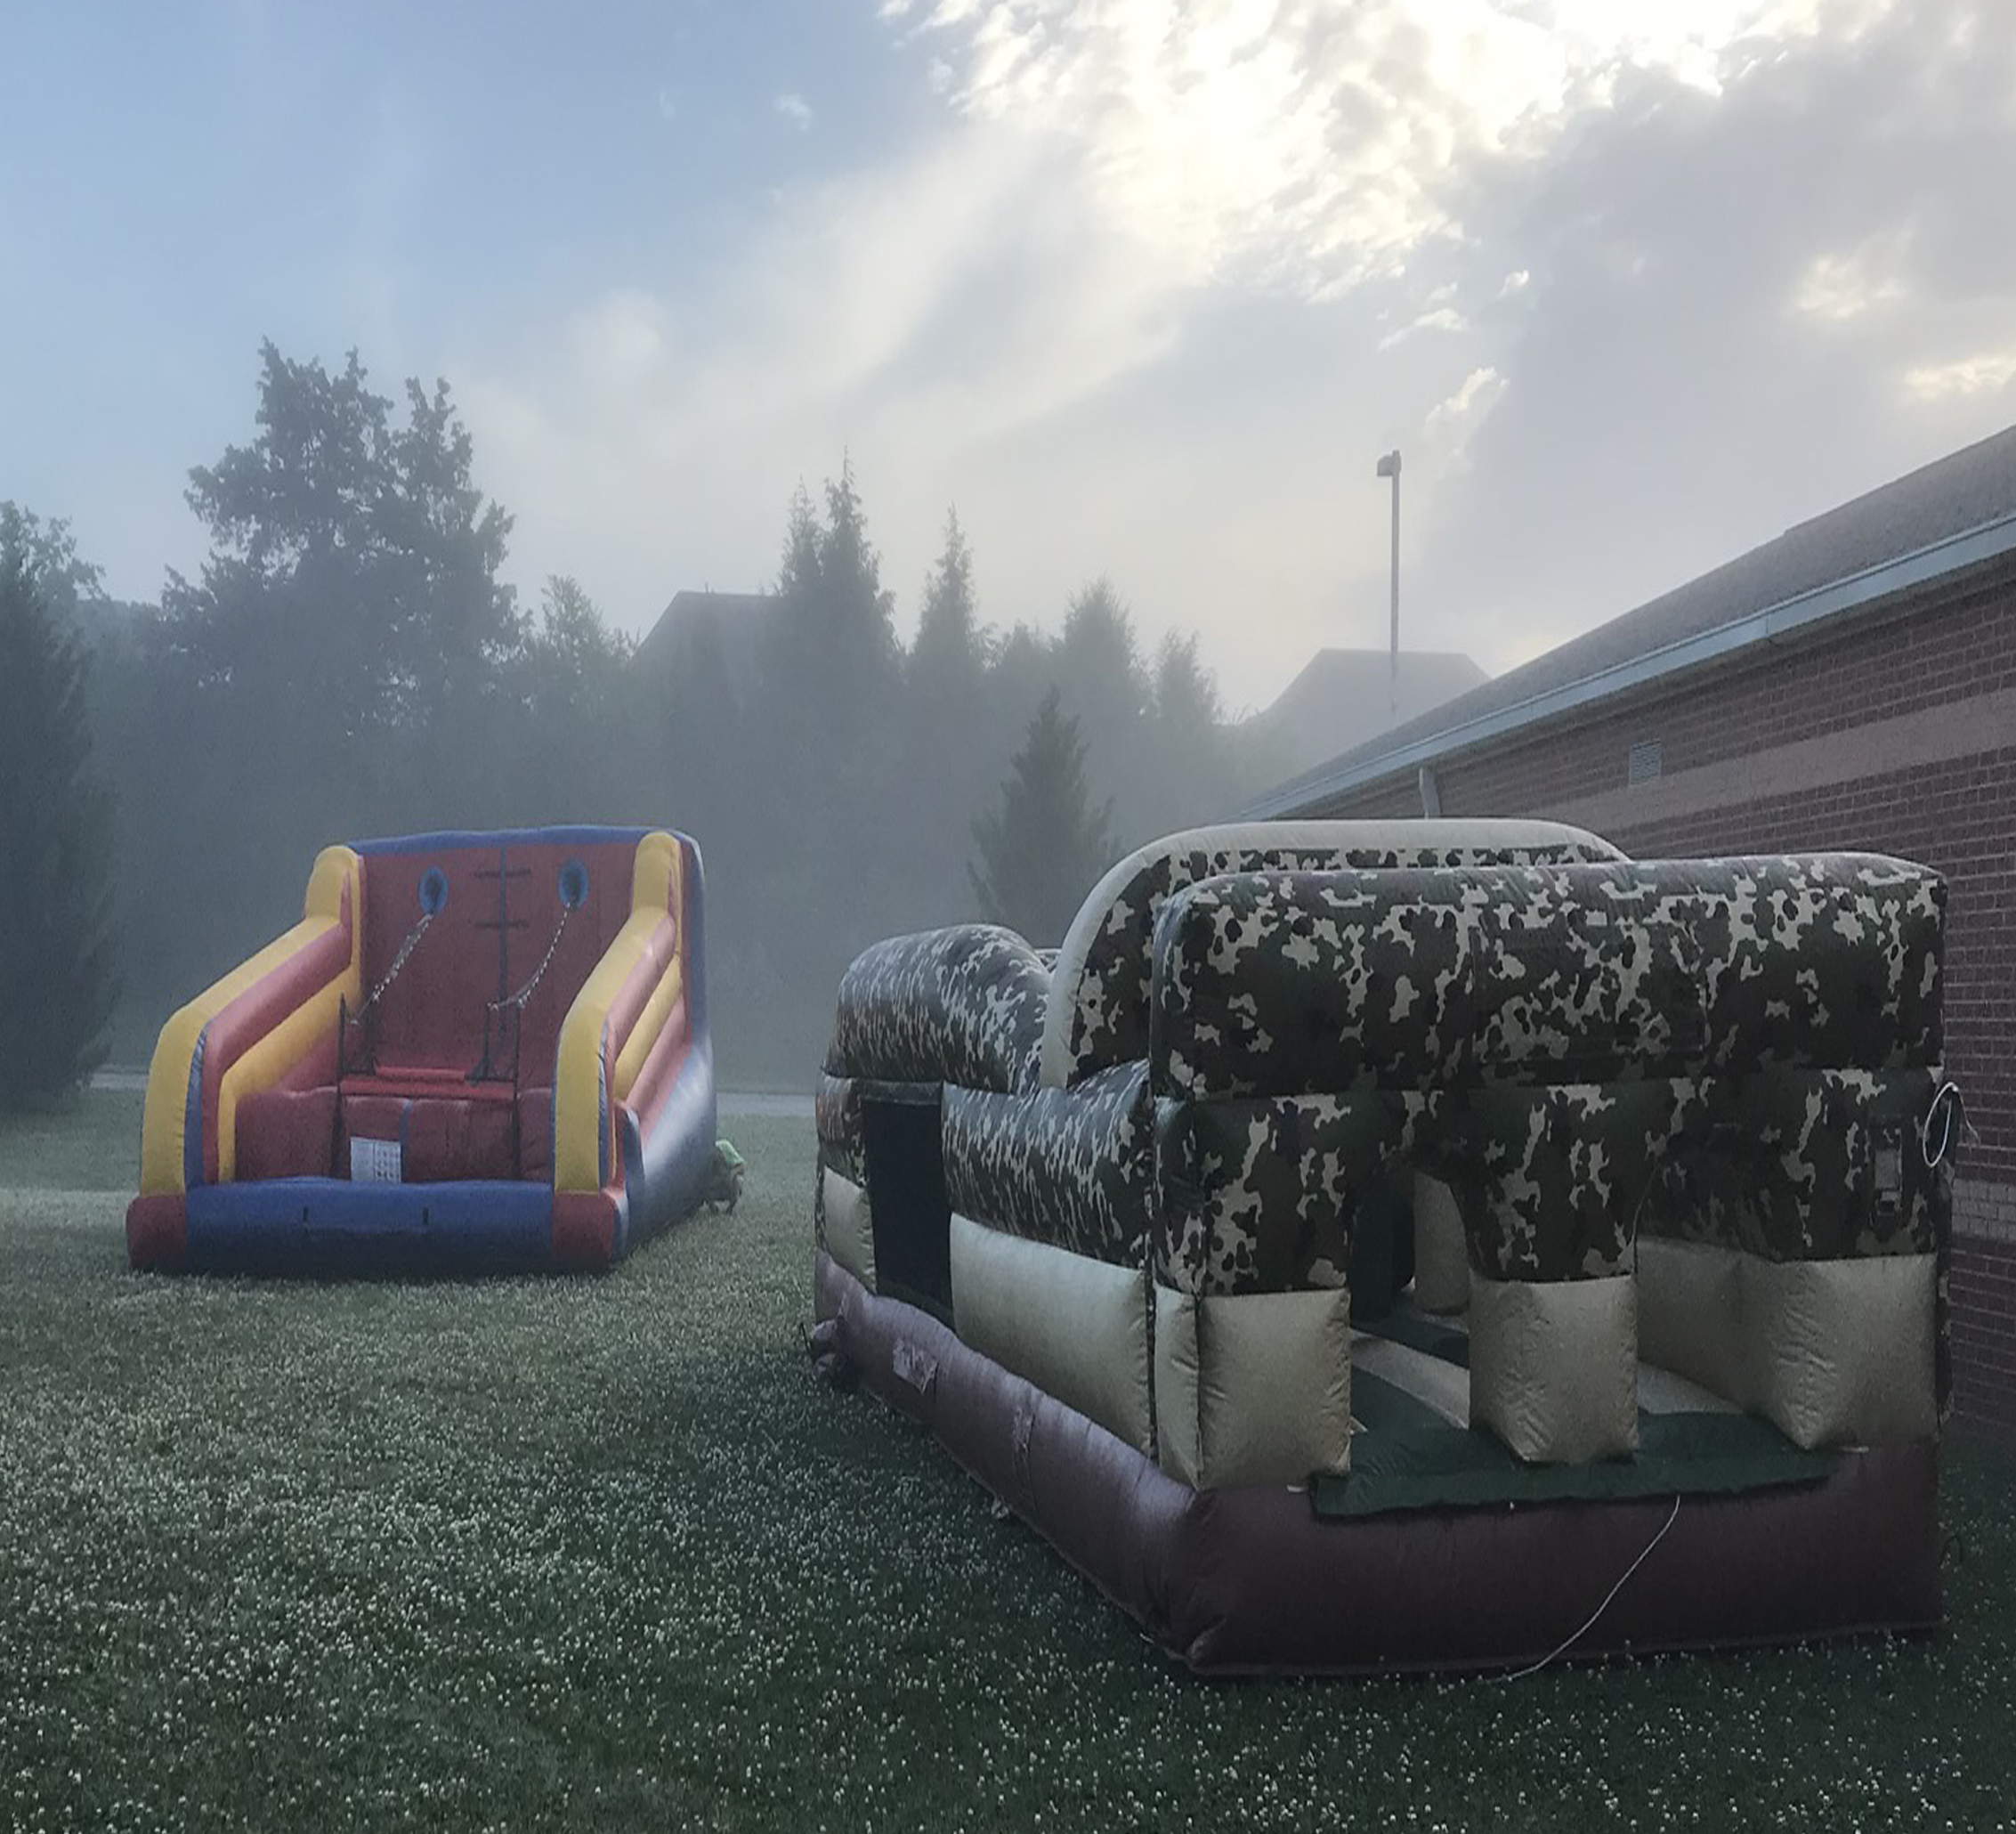 inflatable obstacle course rental near me